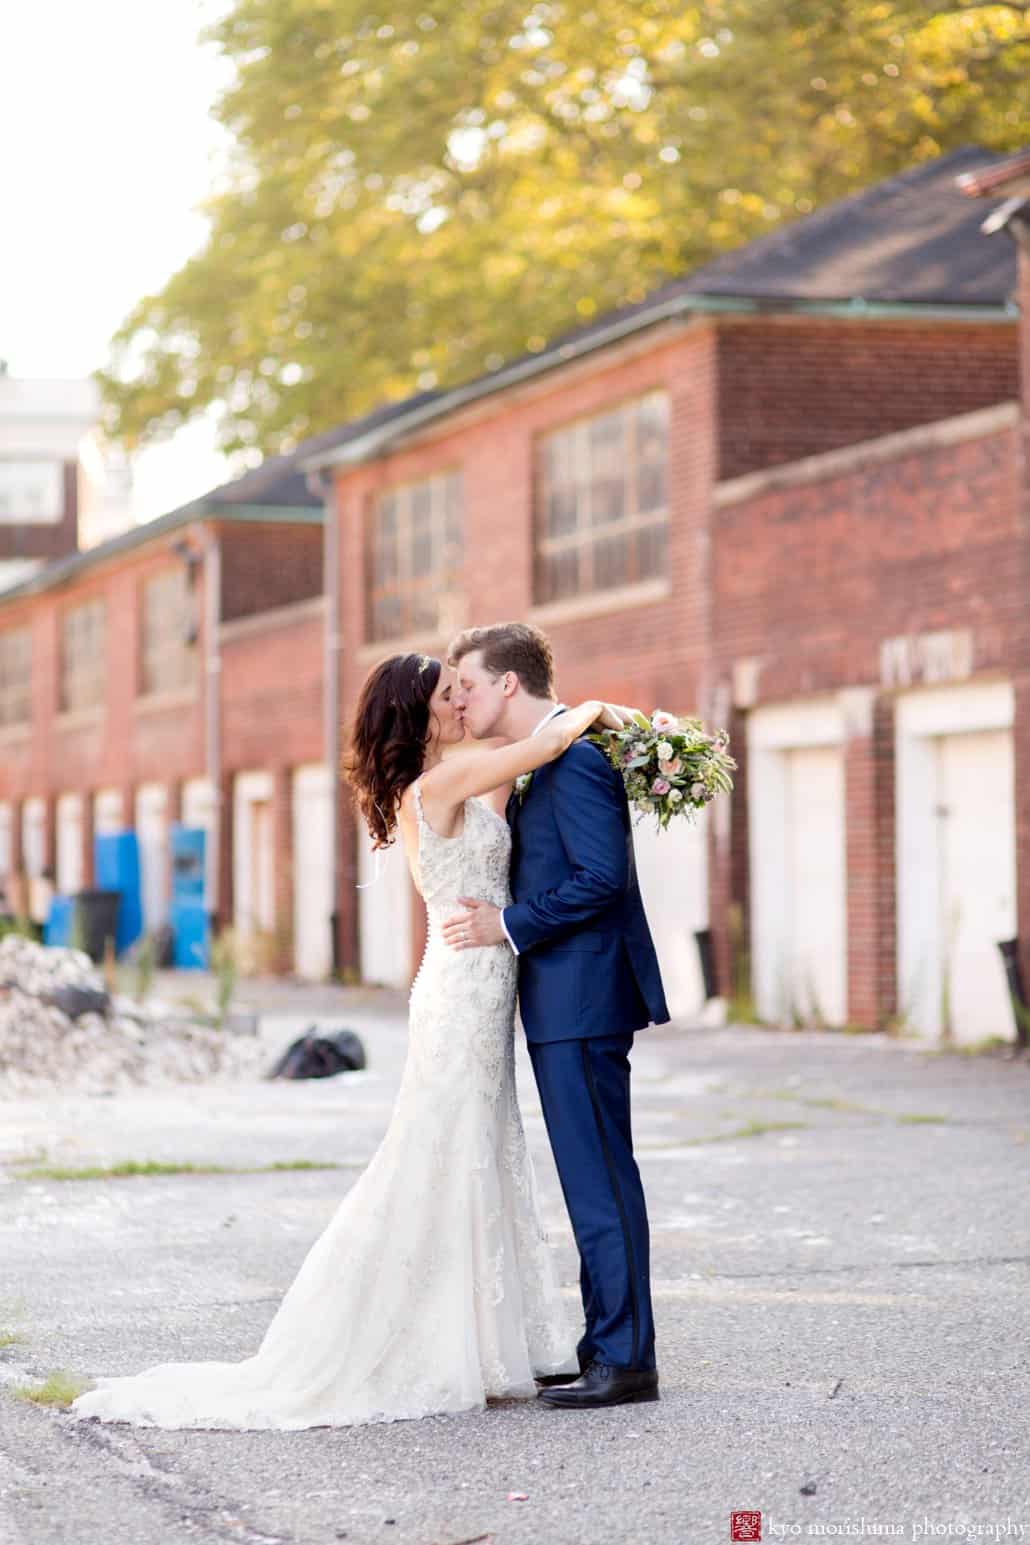 Bride and groom kiss in a Governors Island alleyway, photographed by Kyo Morishima